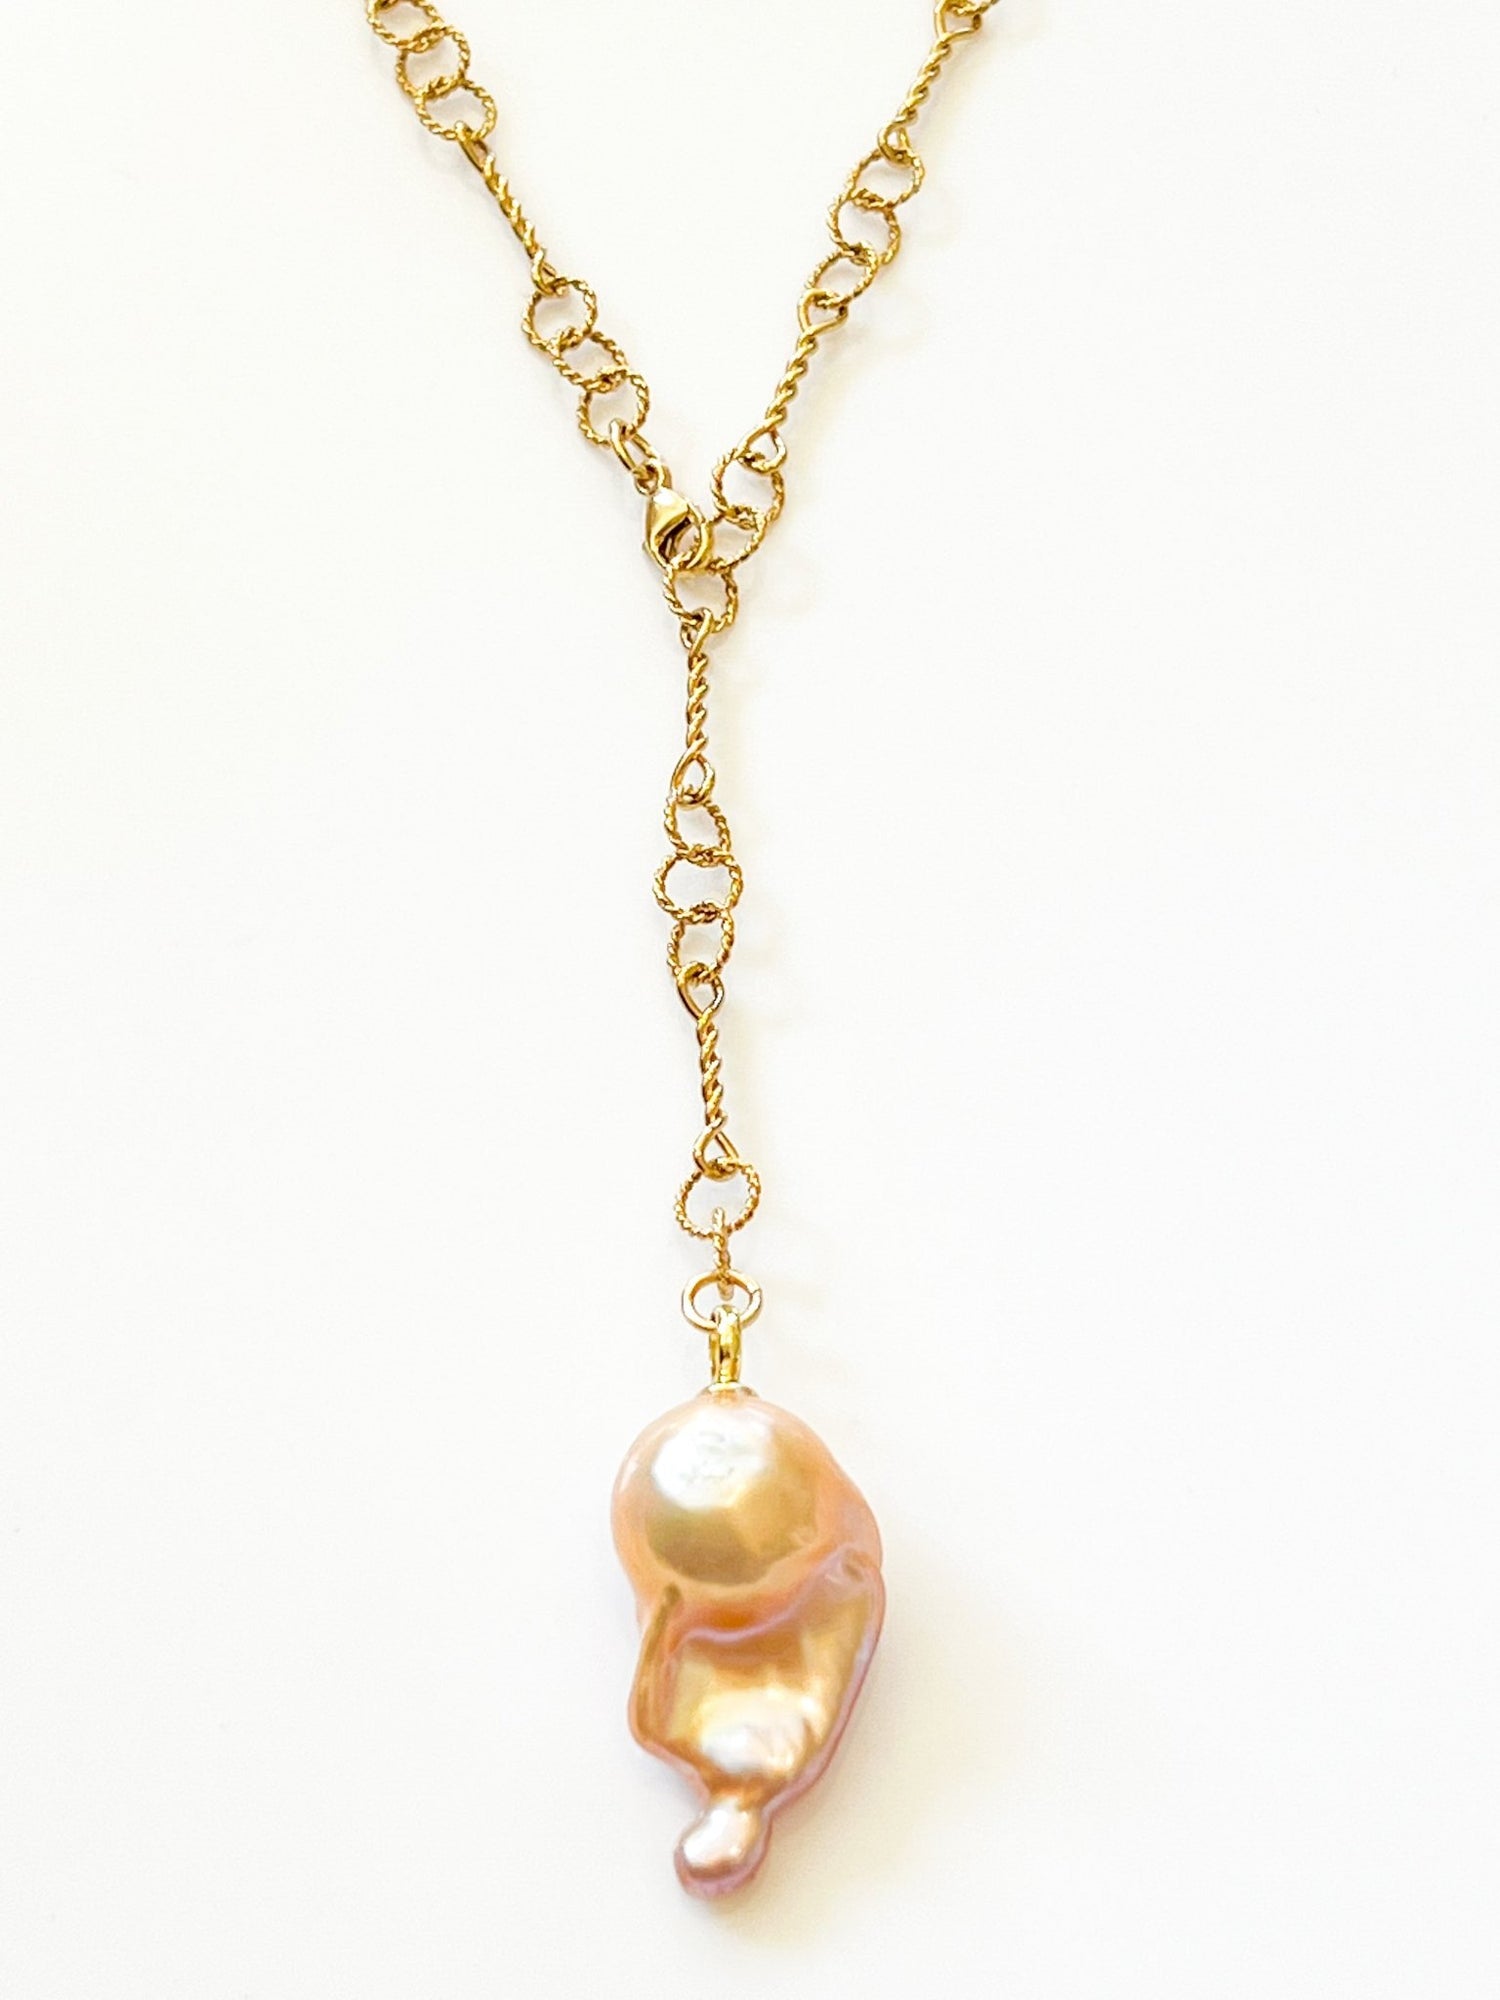 Peach Japanese Keshi Pearl Necklace on Gold Nautical Chain by Sage Machado - The Sage Lifestyle